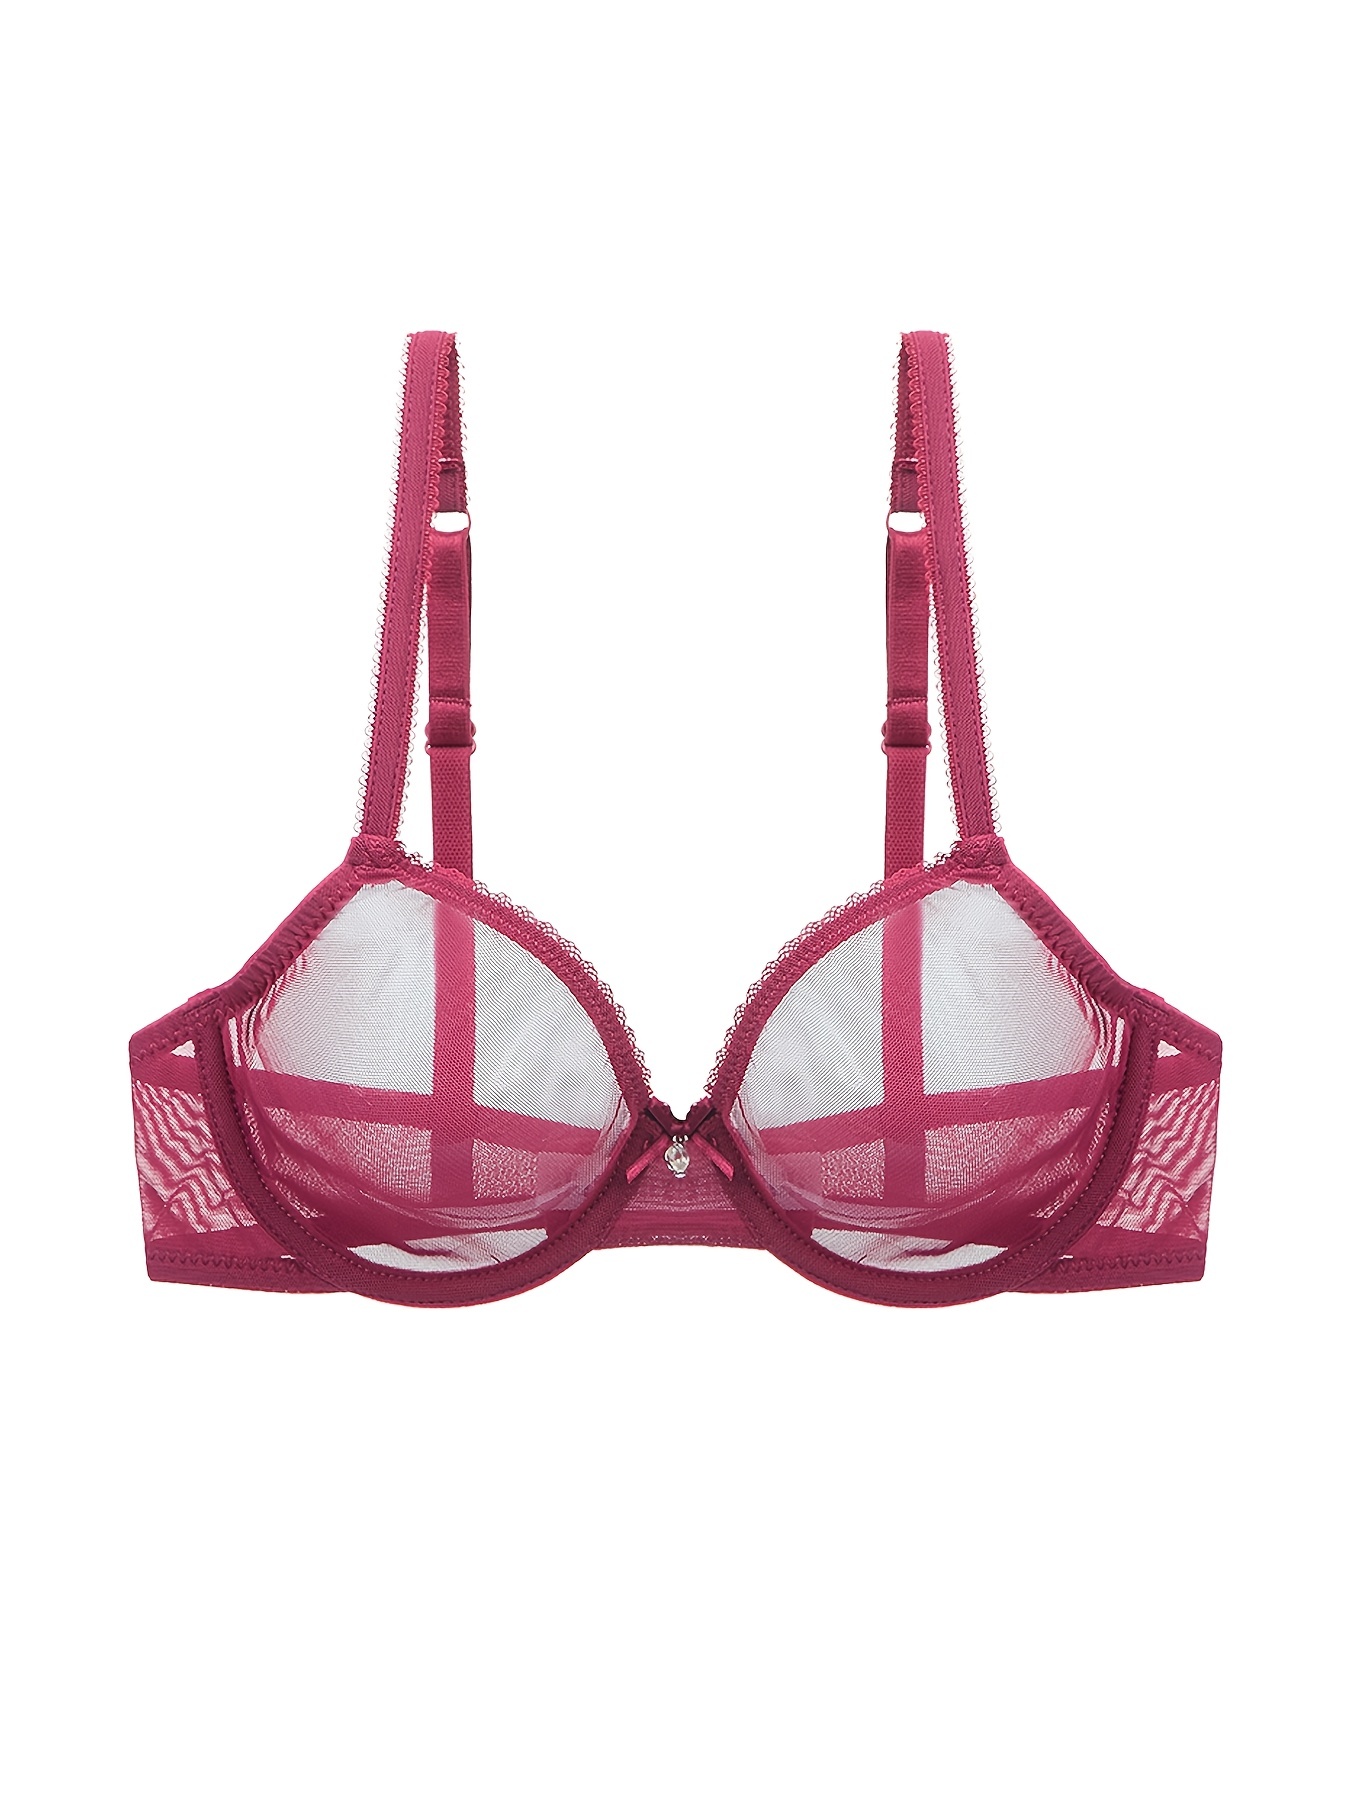 See Through Mesh Sheer Bra And Panty Ultra-thin Sexy Unlined Bra